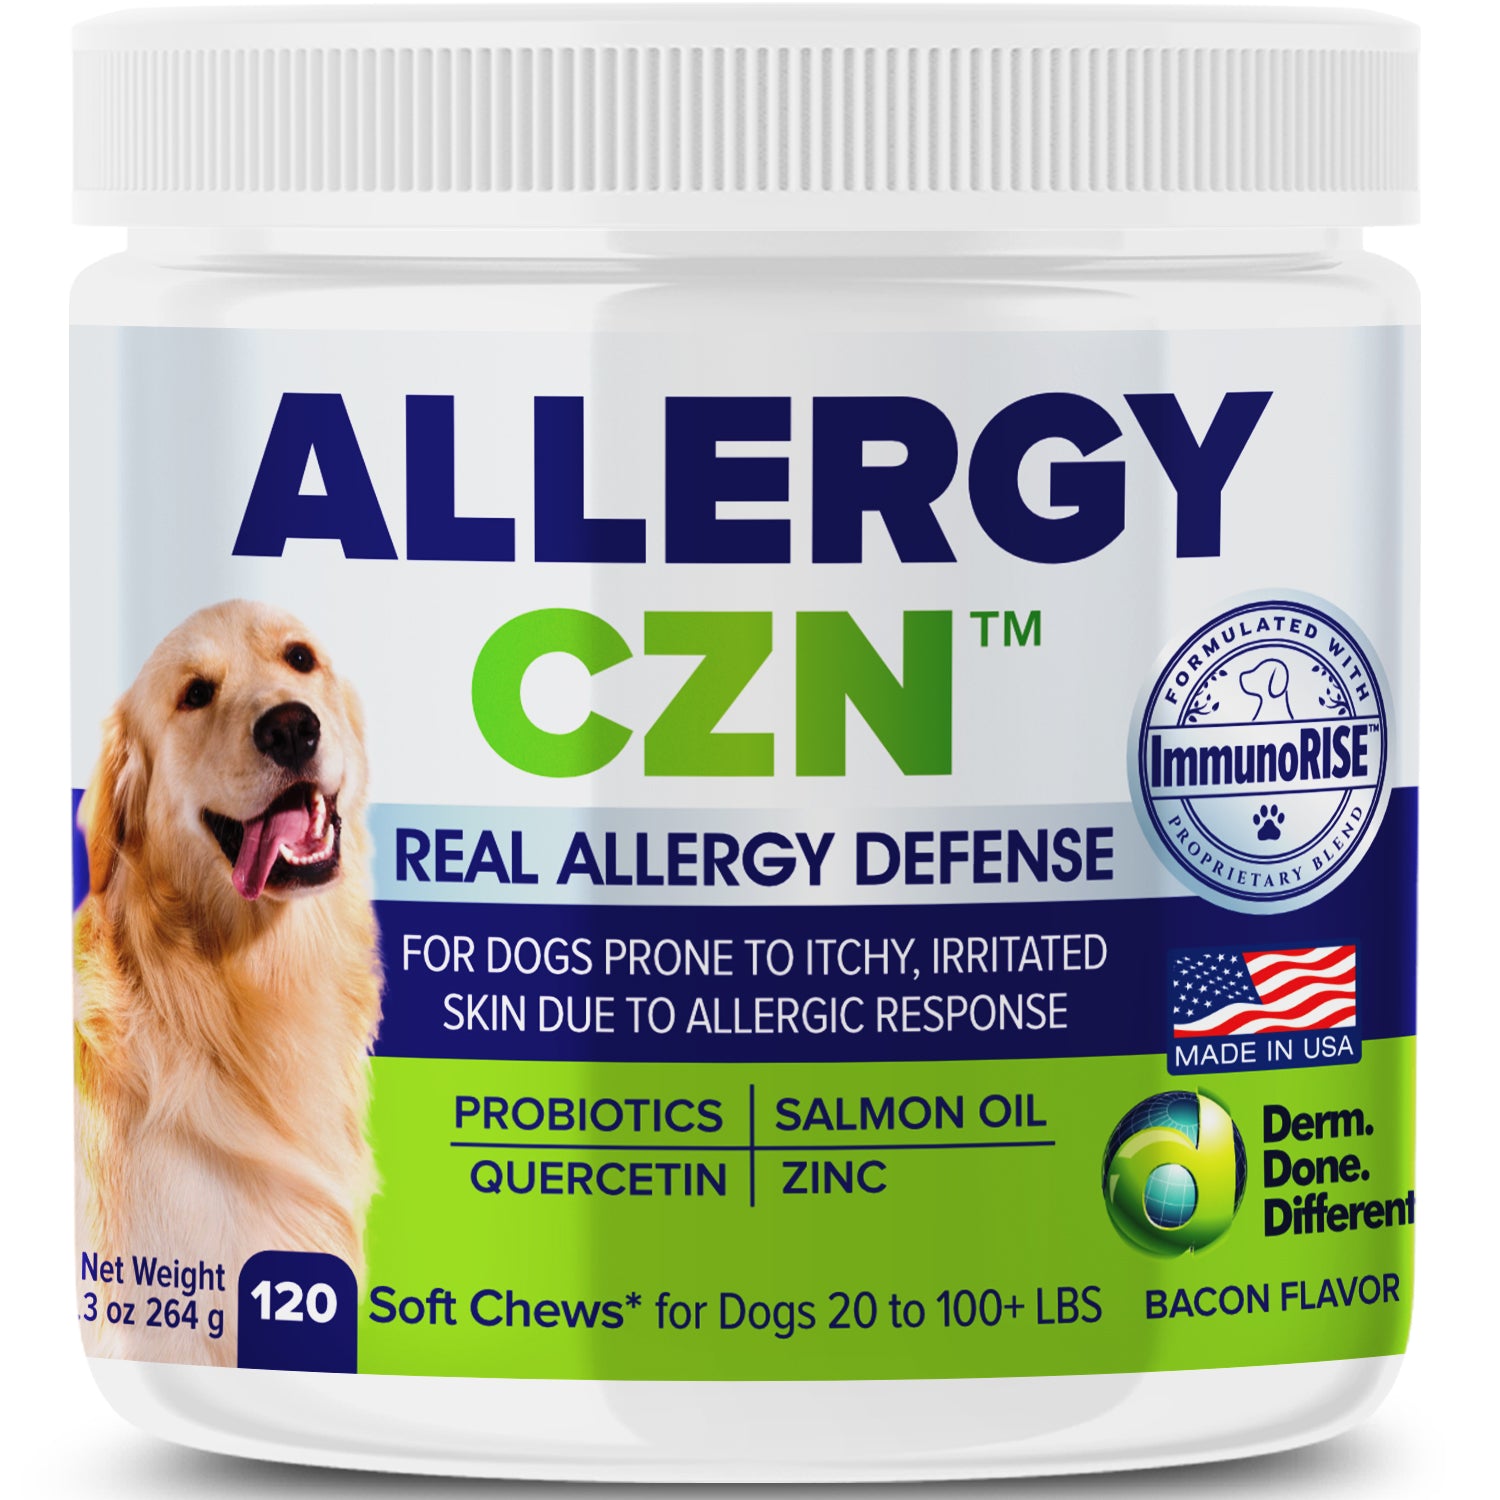 Allergy CZN™ with ImmunoRISE™ Seasonal Allergy Defense for Dogs 20 lbs and Up